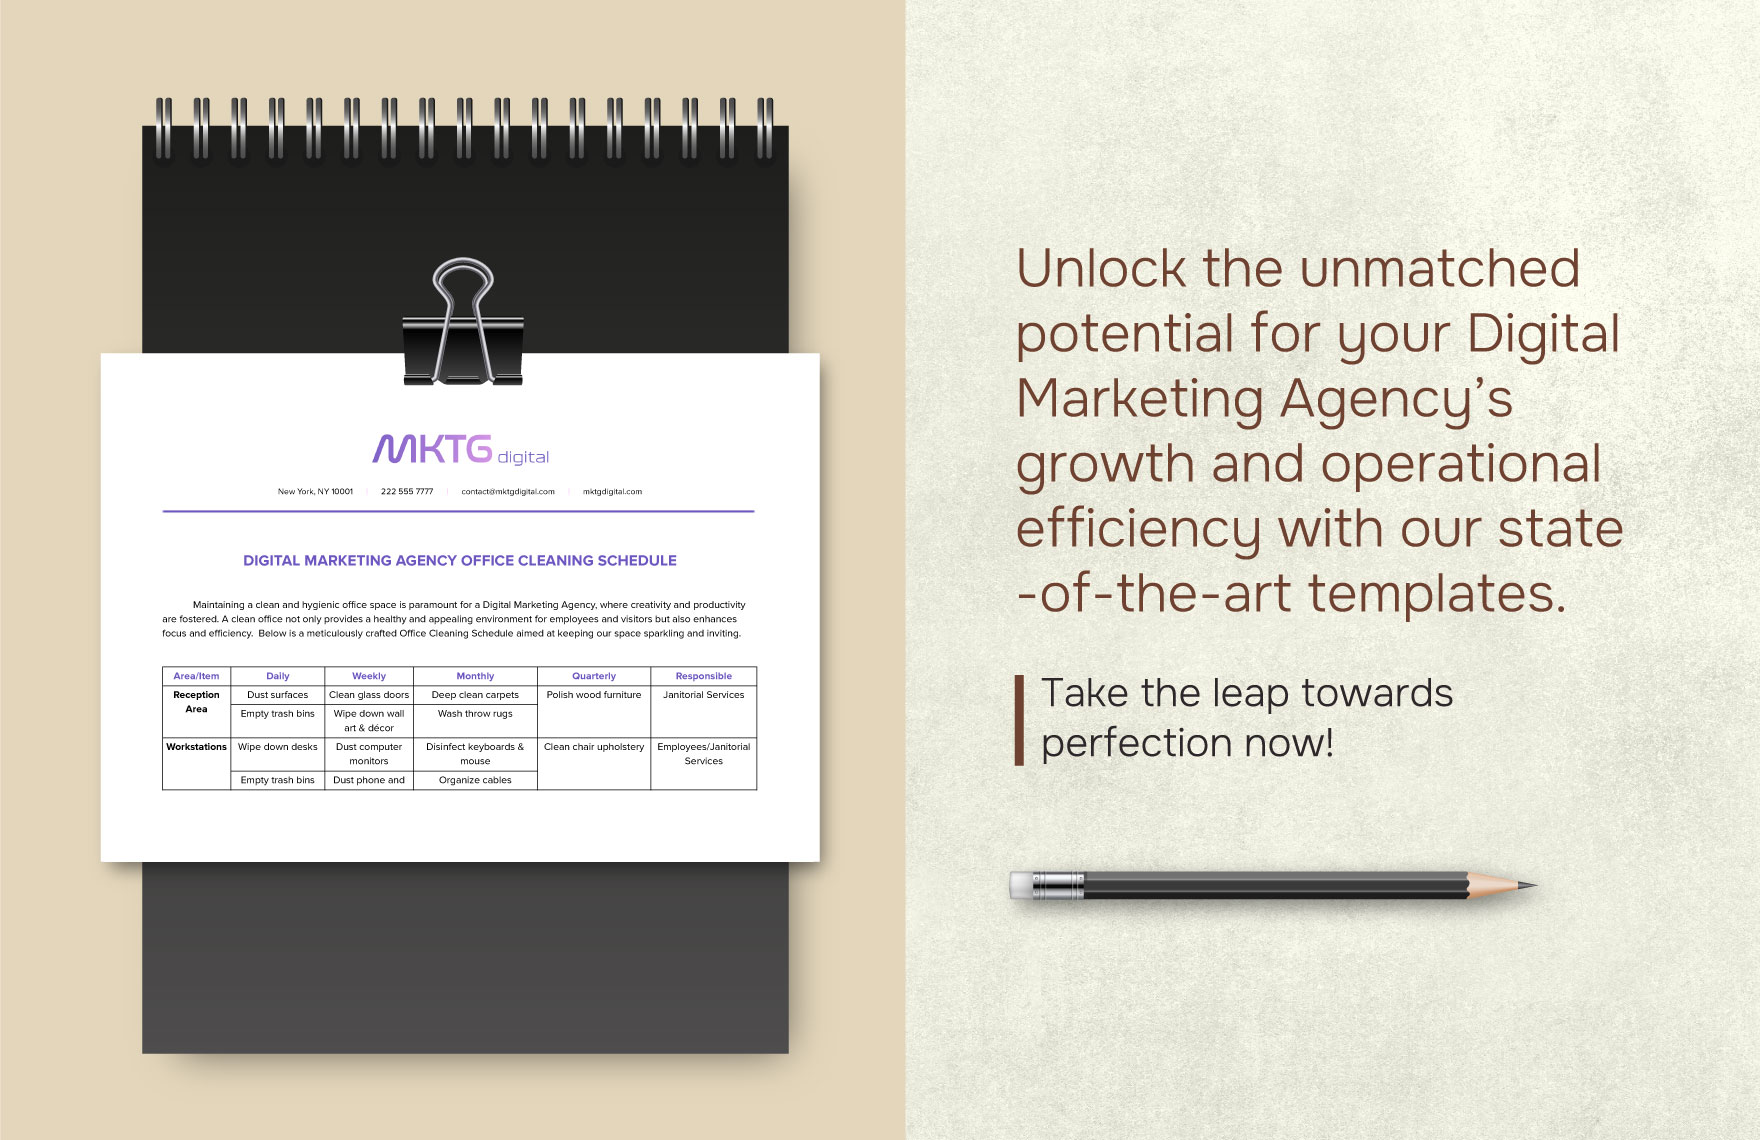 Digital Marketing Agency Office Cleaning Schedule Template